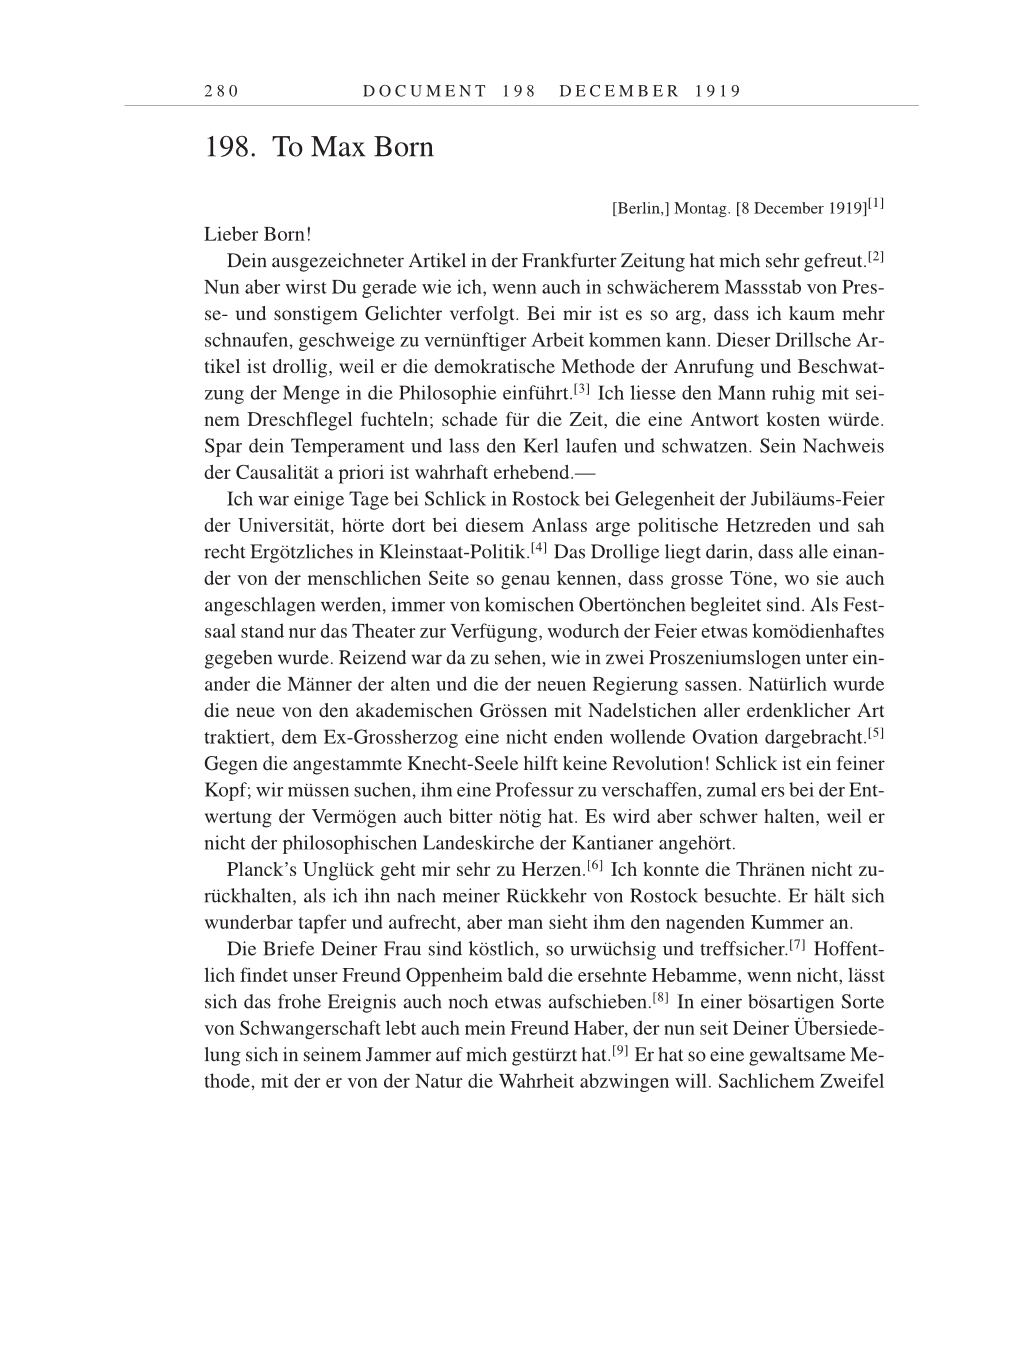 Volume 9: The Berlin Years: Correspondence January 1919-April 1920 page 280